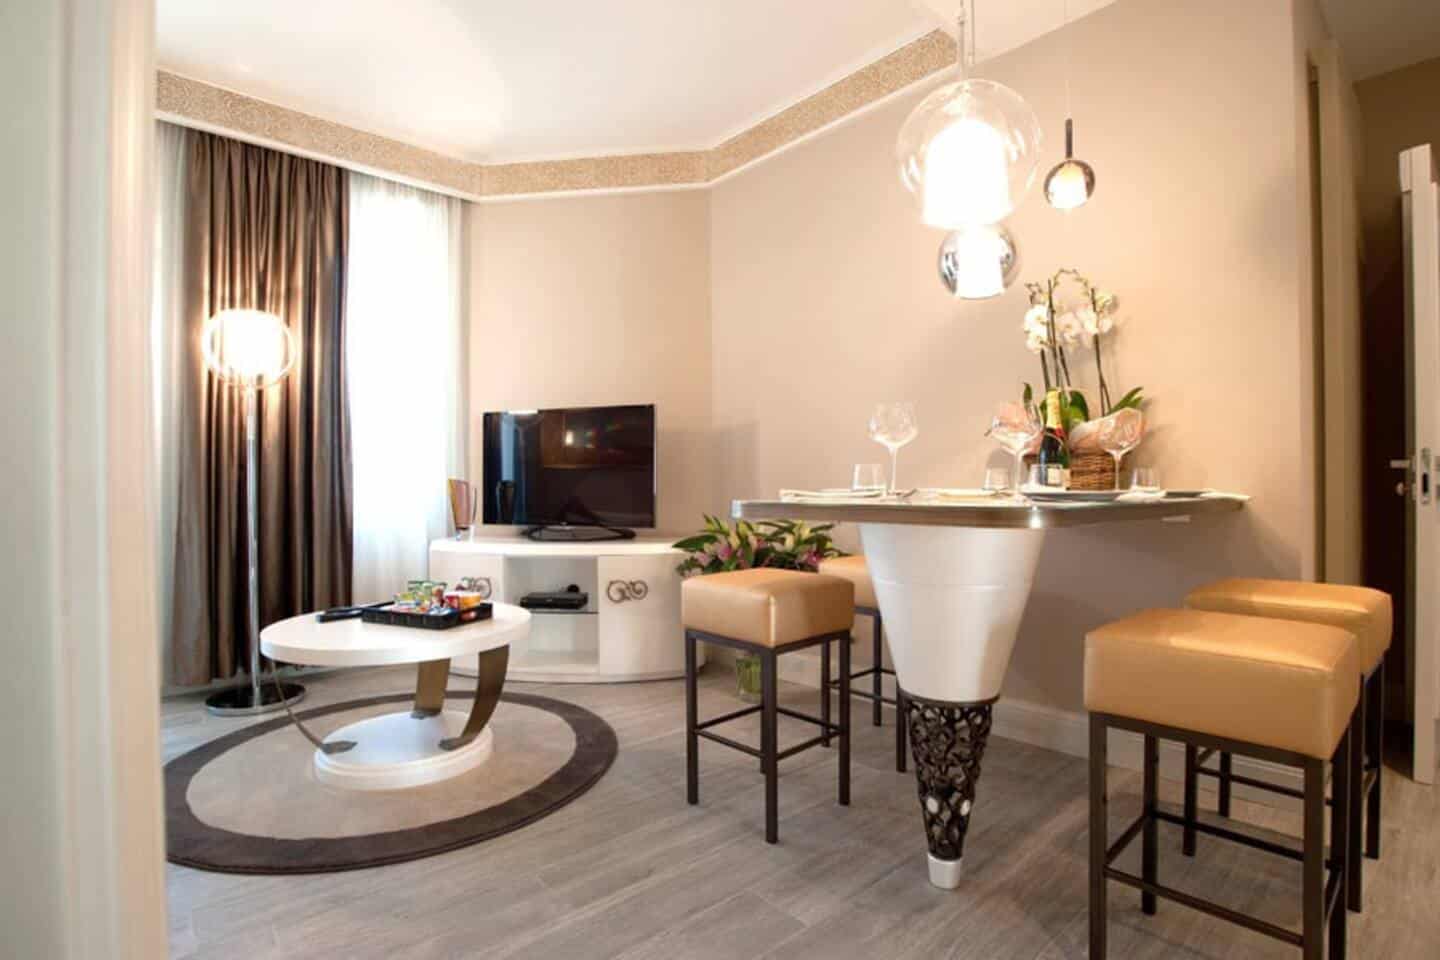 Image of Airbnb rental in Milan, Italy